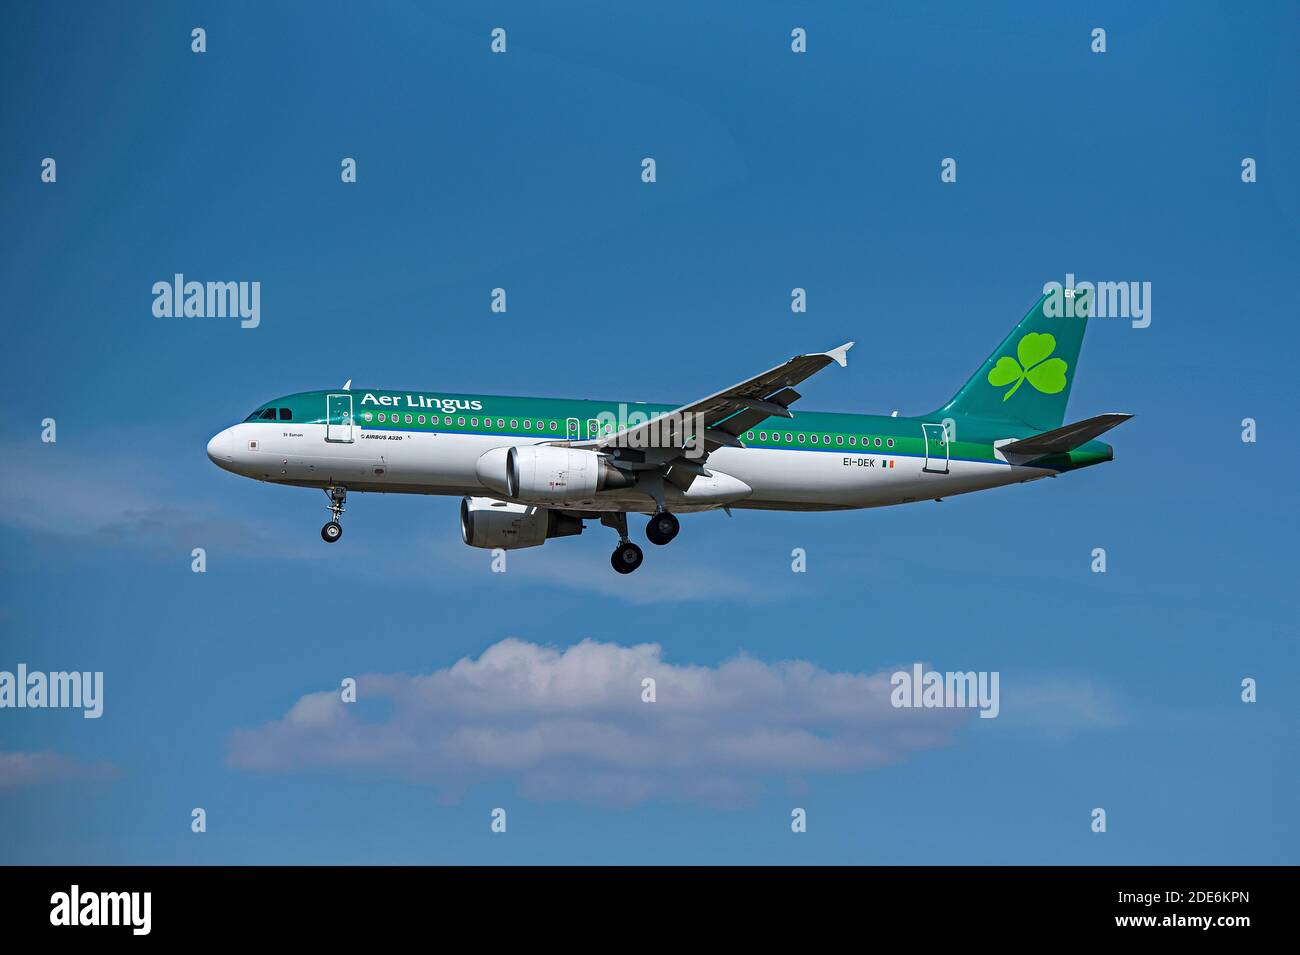 An Airlingus Airbus 320-14 flight approaching London Heathrow airport in the UK. Stock Photo